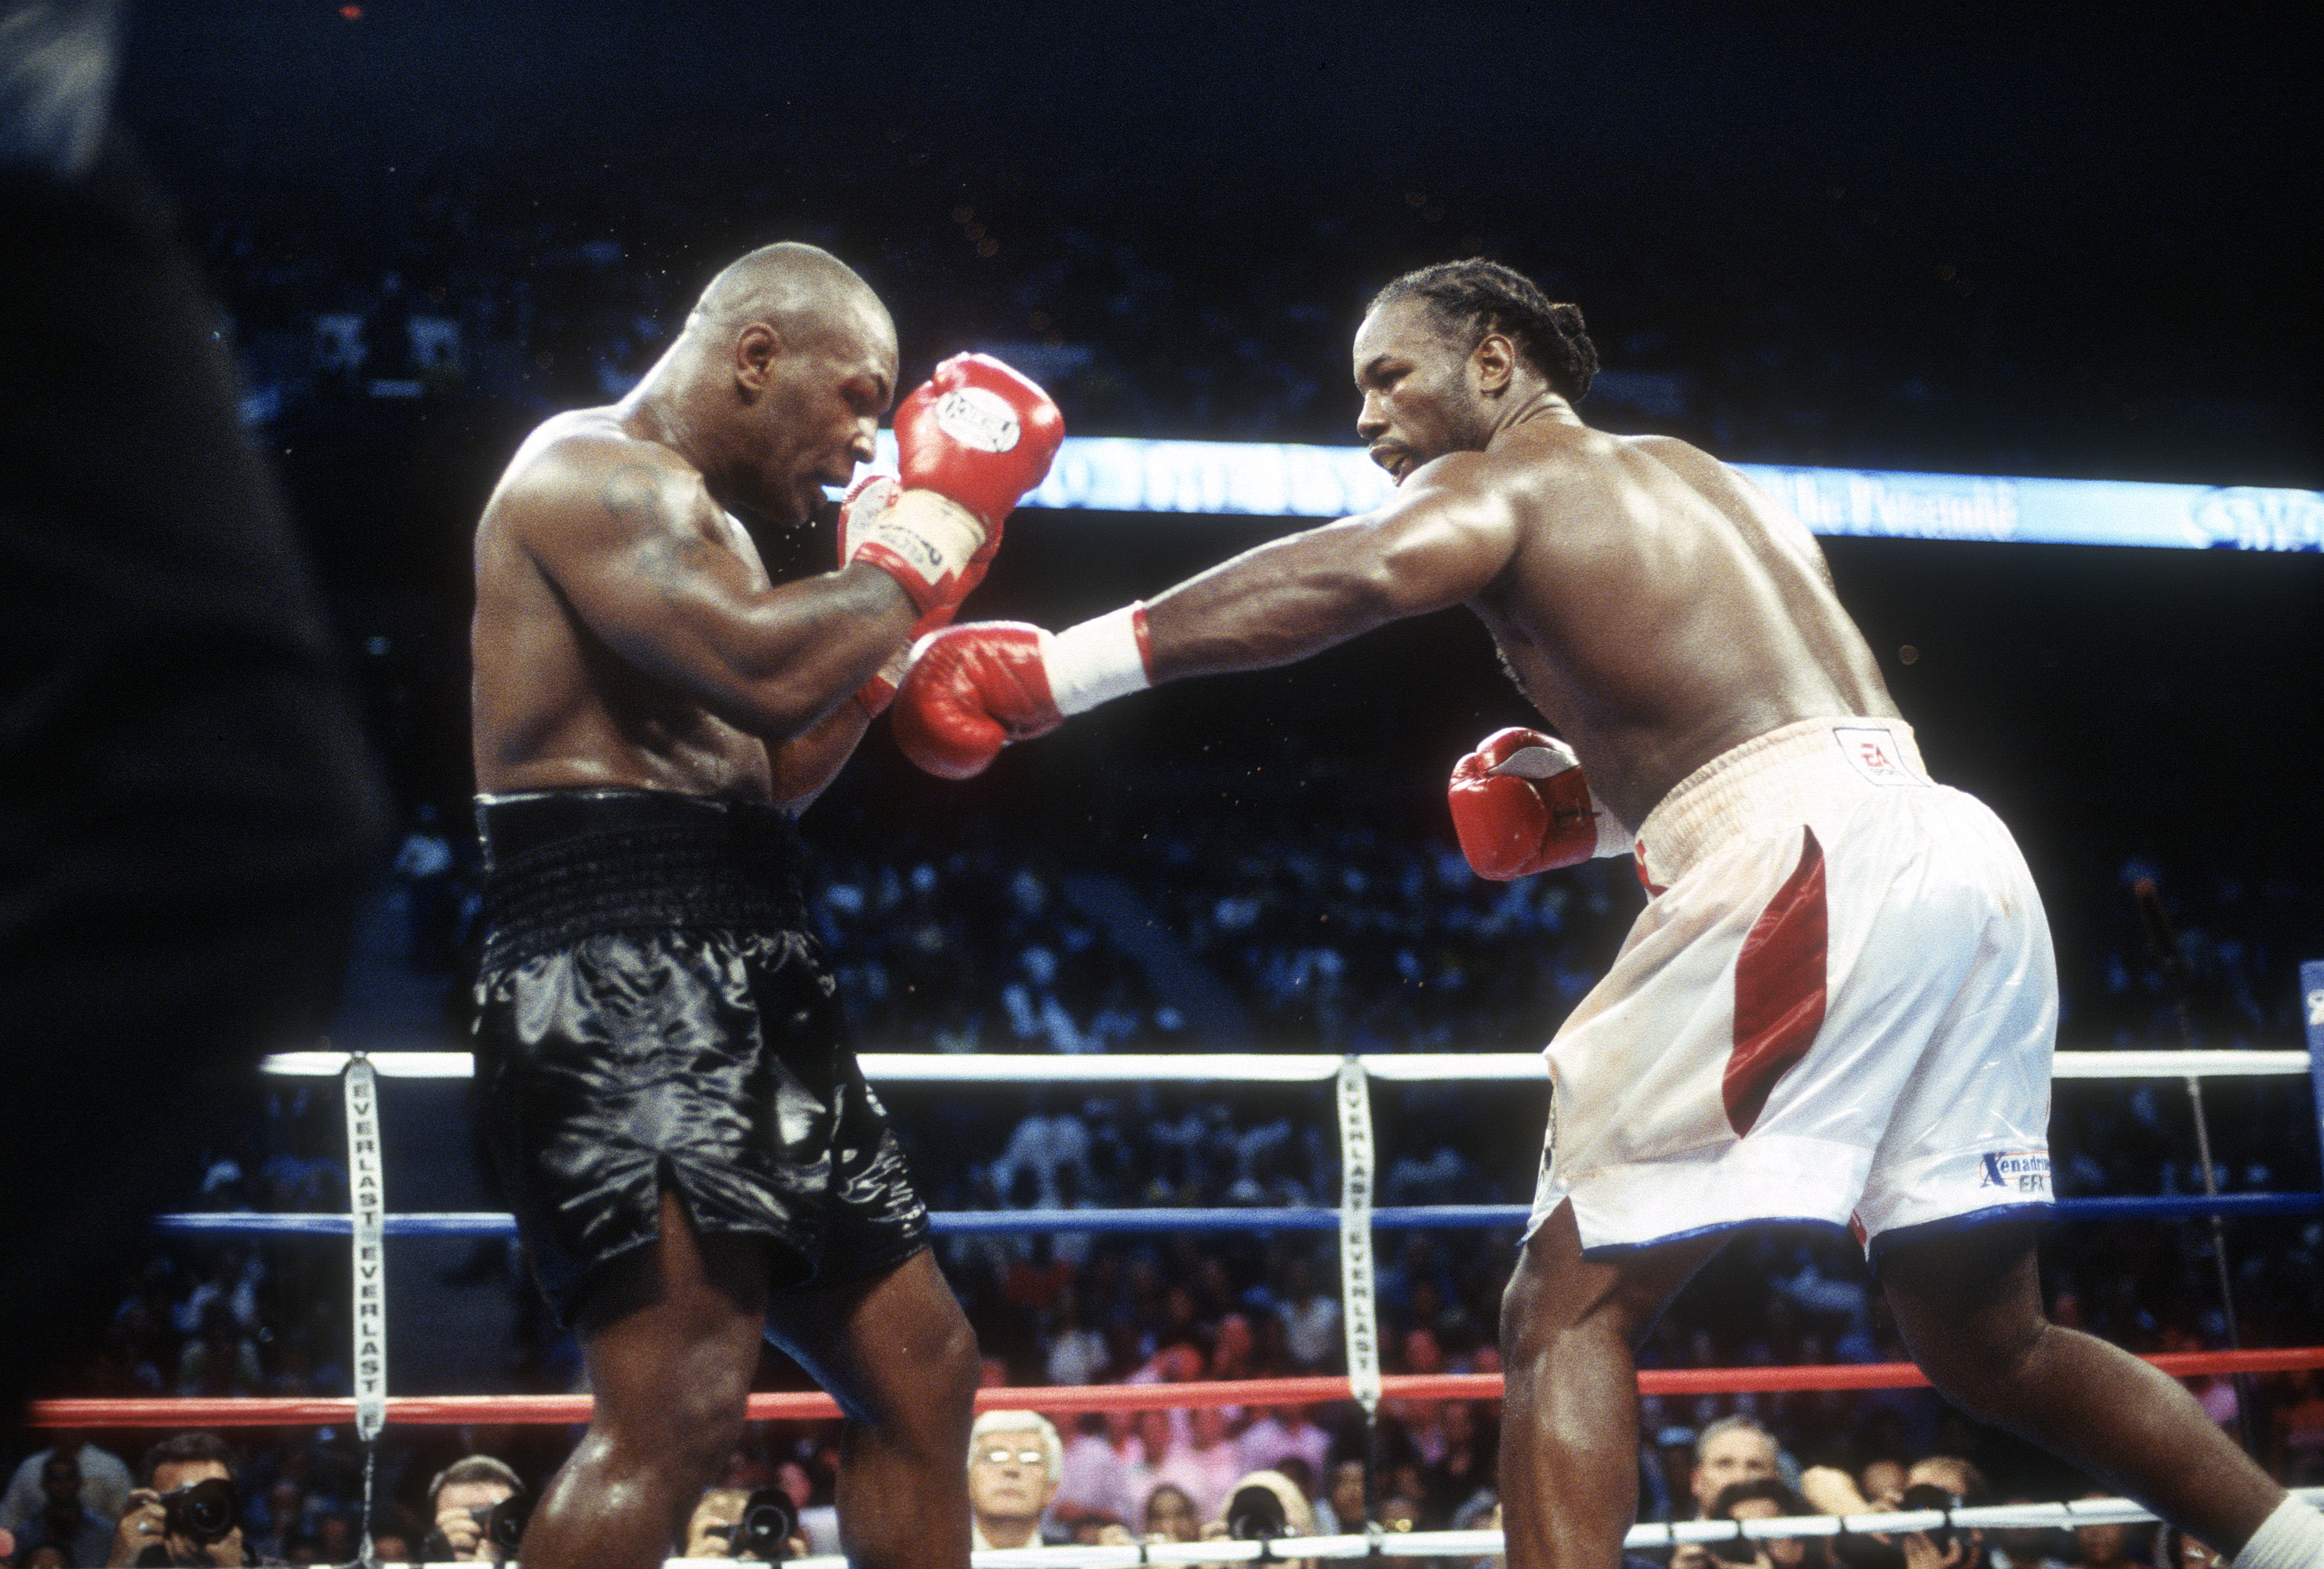 Mike Tyson Vs Lennox Lewis—Who Won When They Fought?